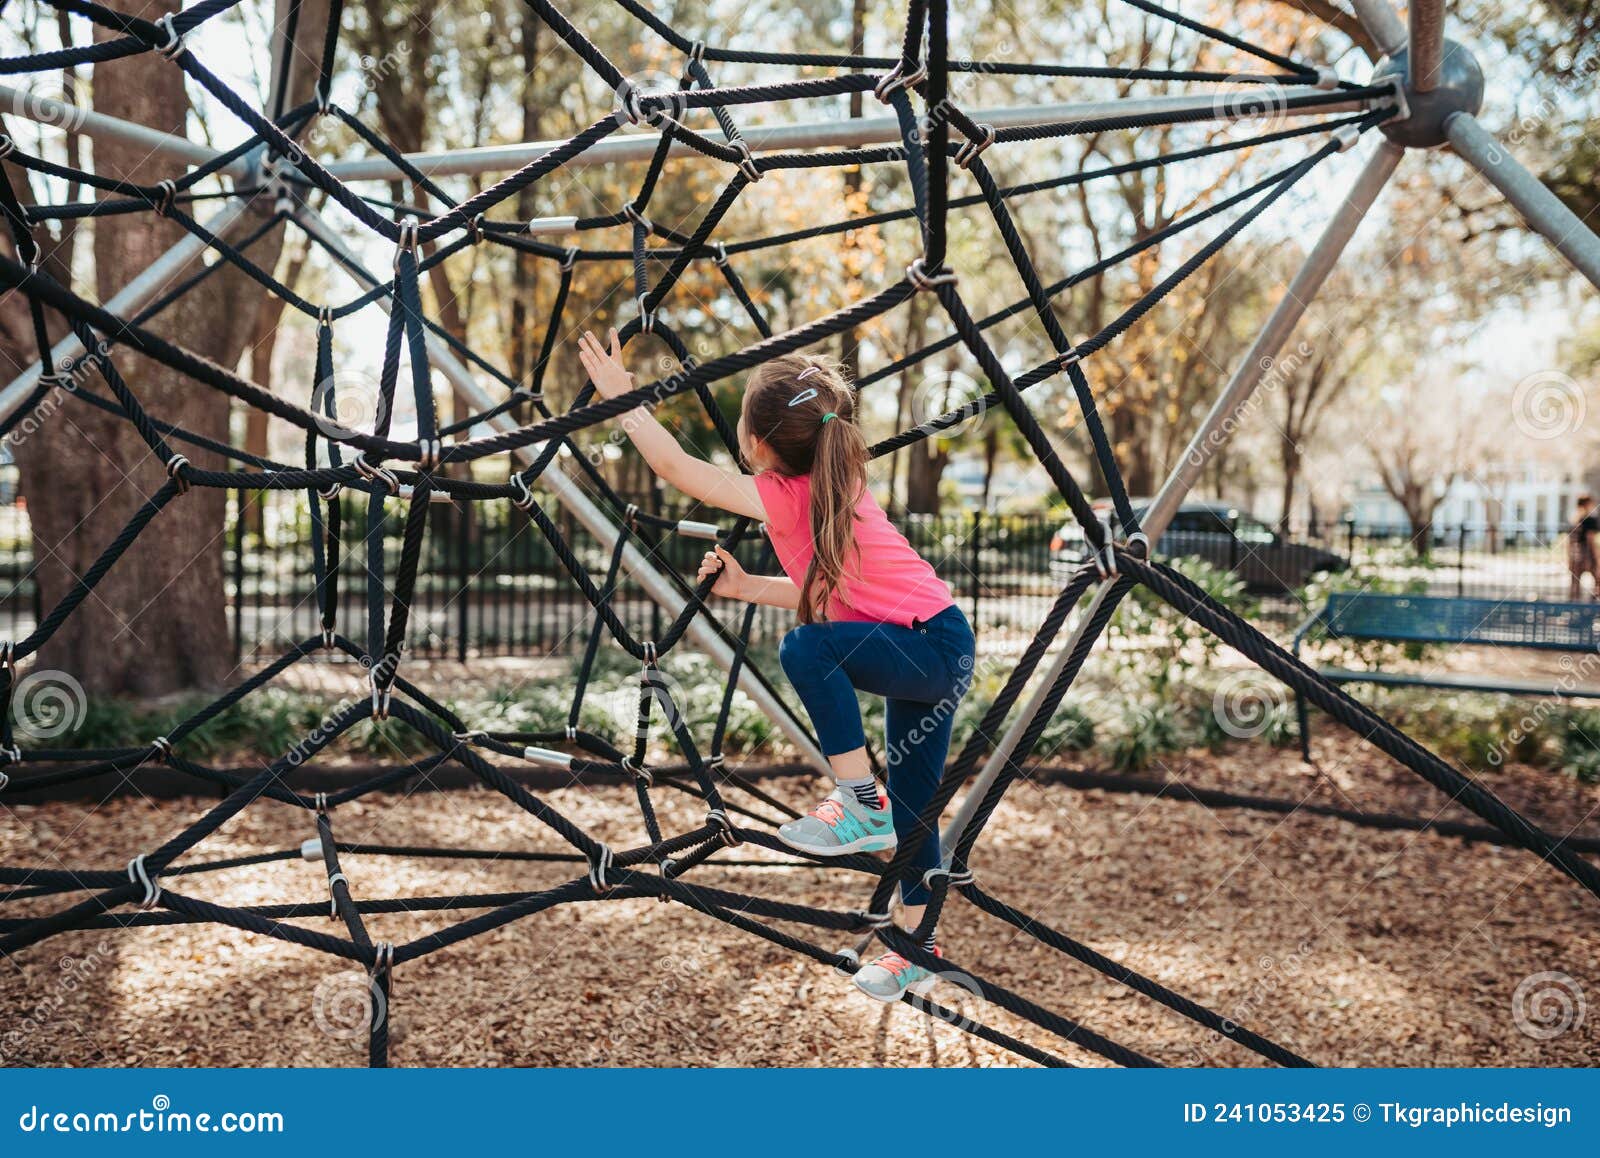 https://thumbs.dreamstime.com/z/child-playground-little-girl-climbing-net-tower-outdoor-play-space-polyester-twisted-rope-241053425.jpg